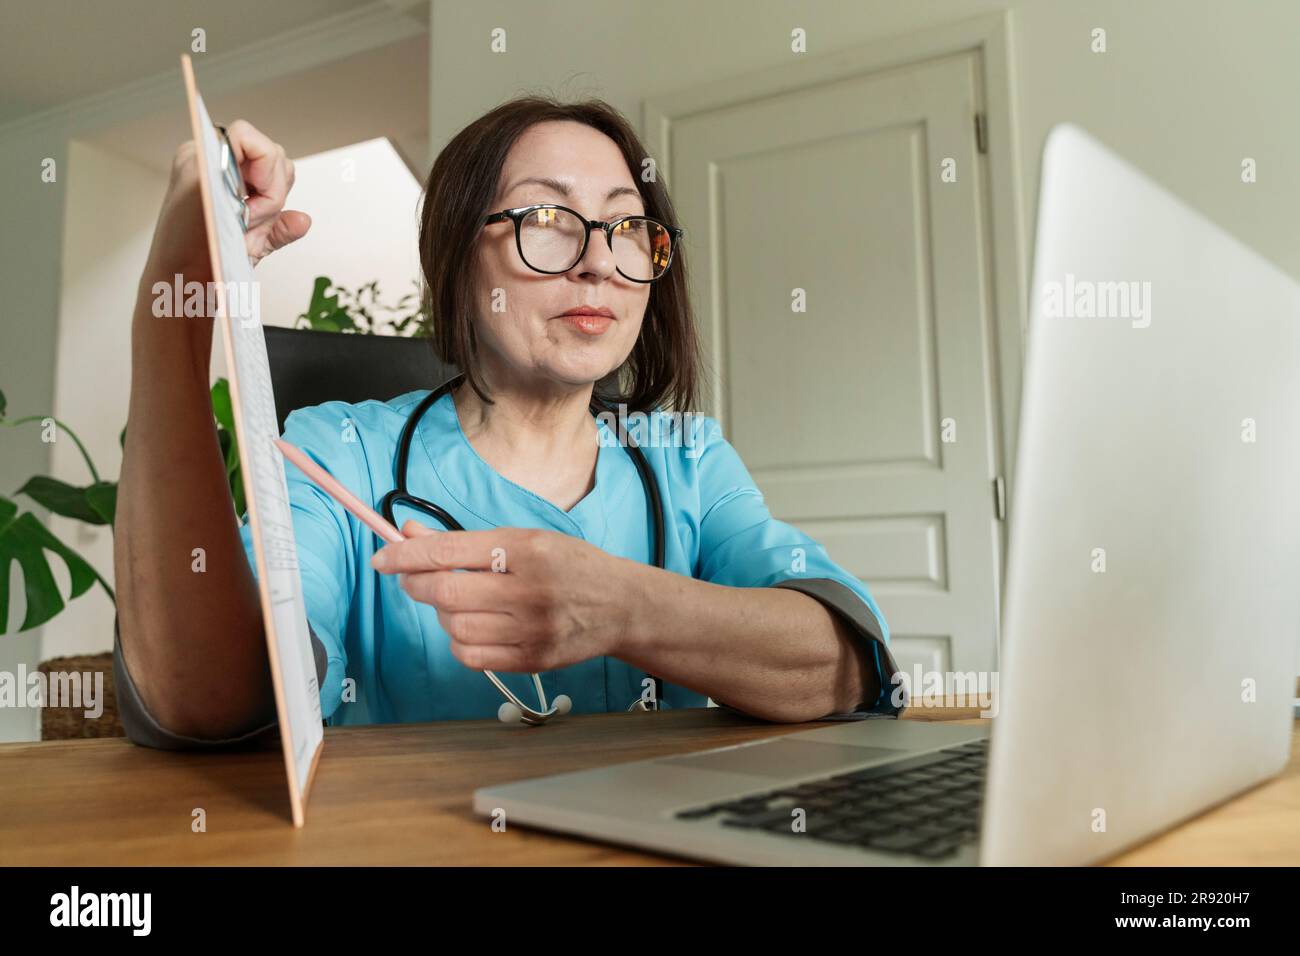 Doctor advising patient through video call on laptop at medical practice Stock Photo